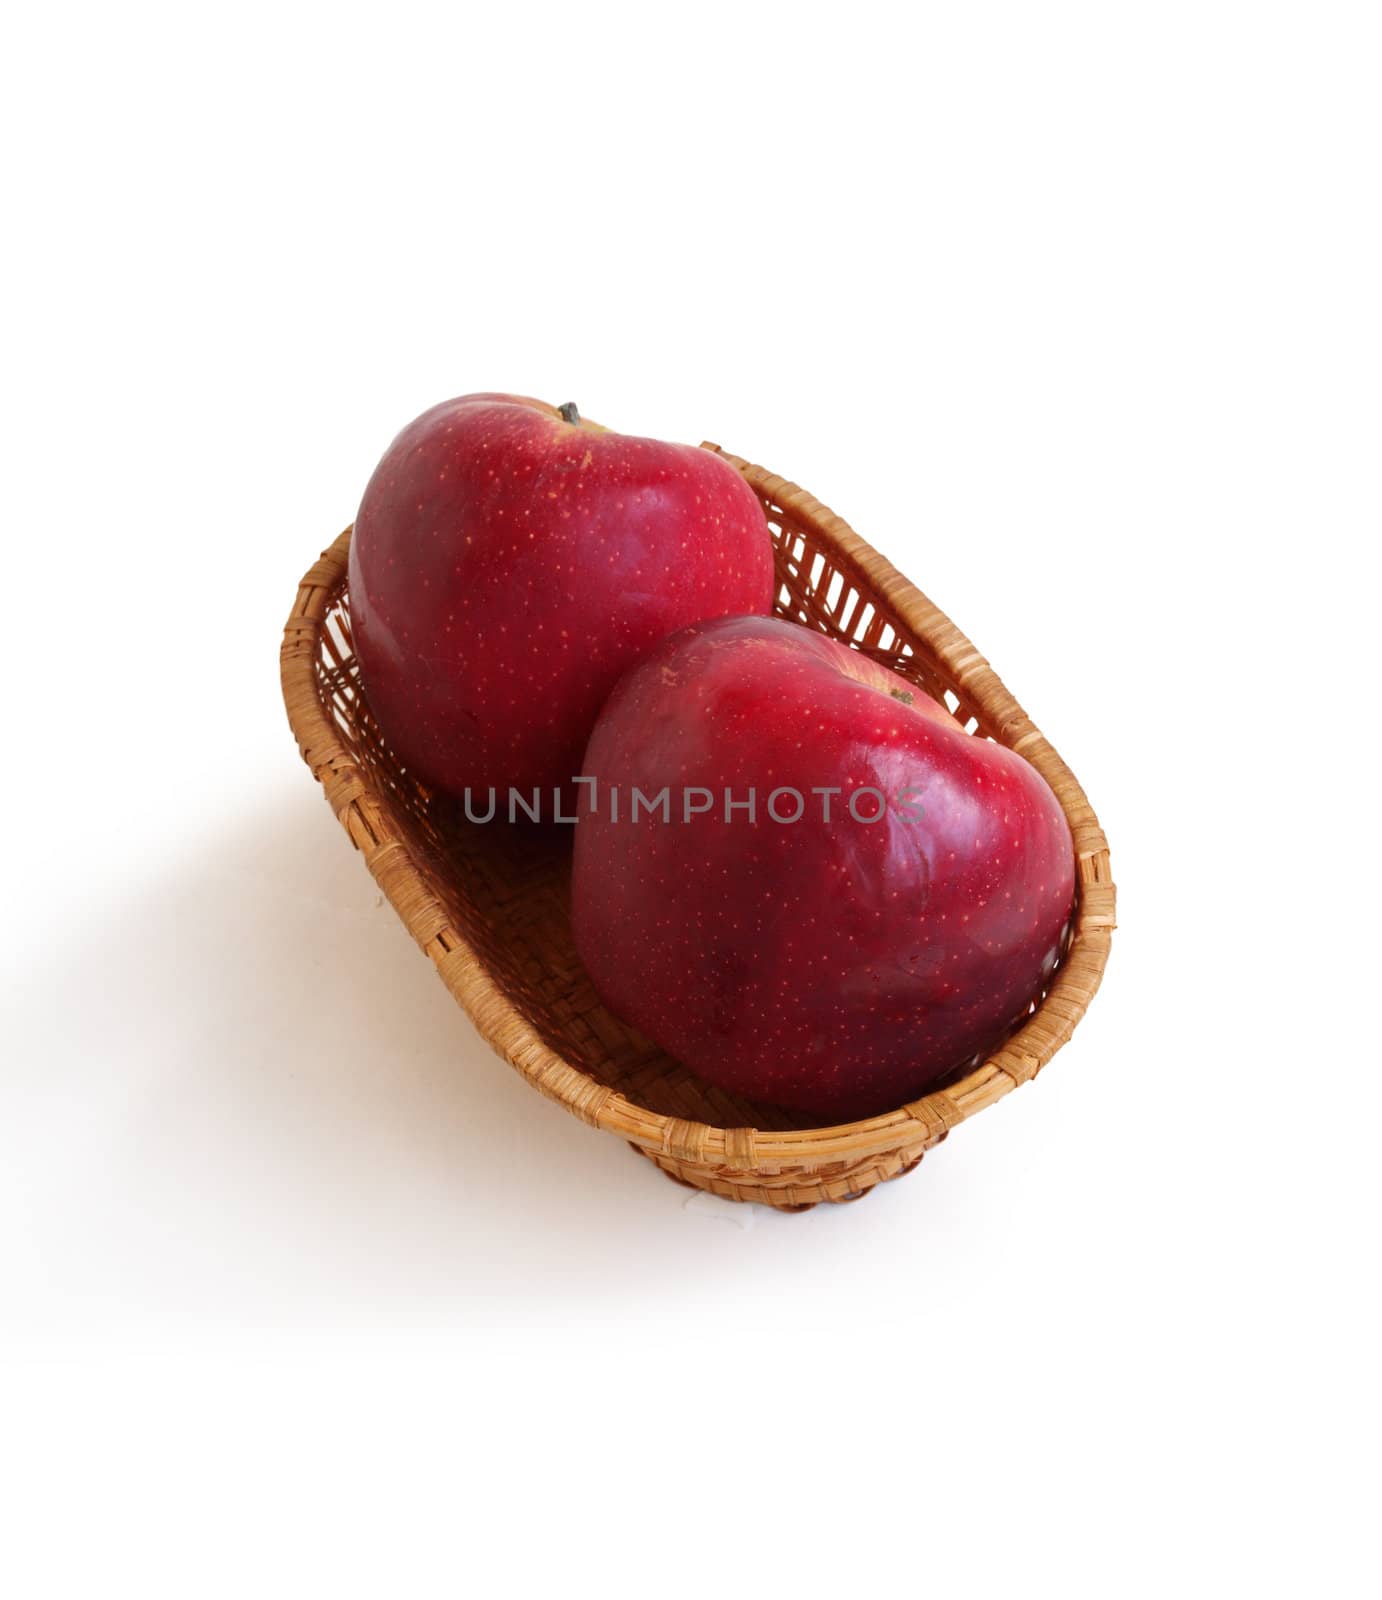 Two apples in a basket on a white background